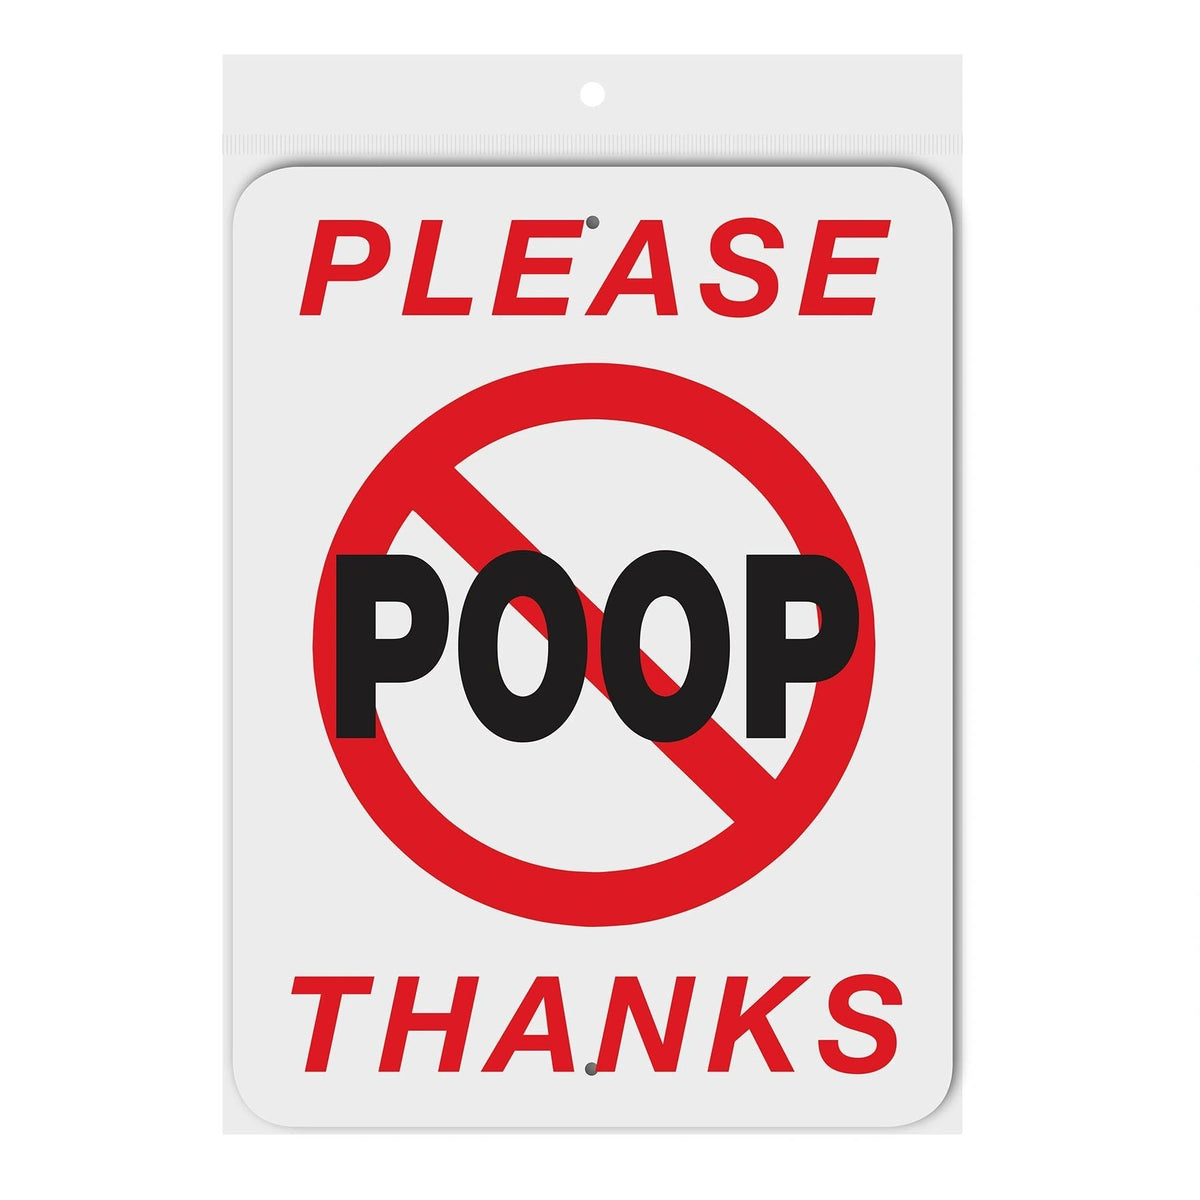 Please No Poop Thanks Sign Aluminum 9 in X 12 in #3245305